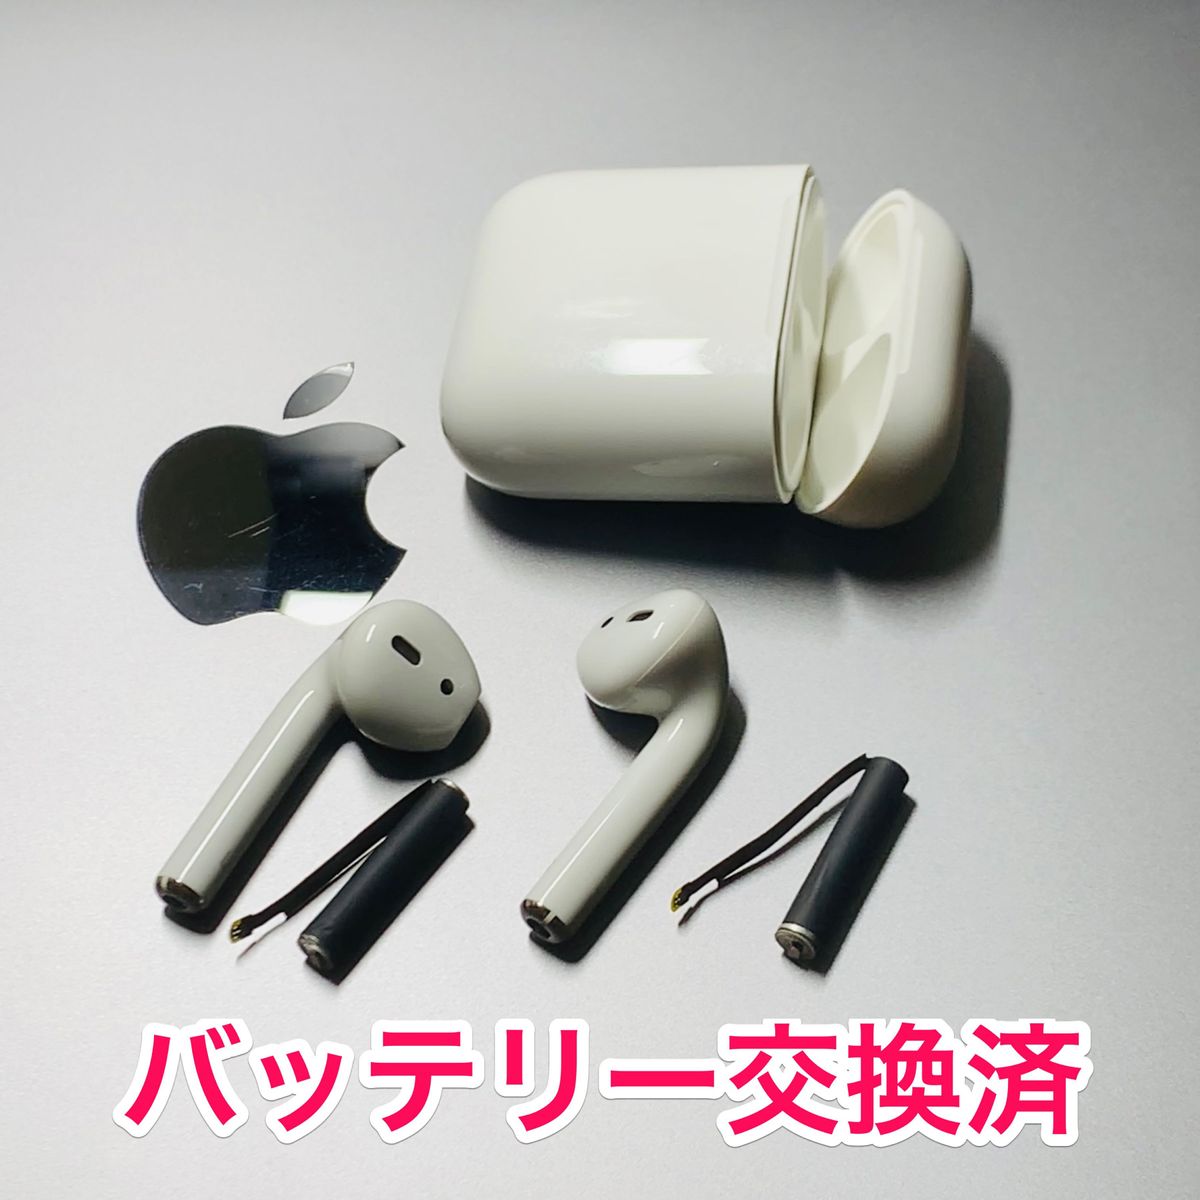 AirPods 第一世代 バッテリー新品 / エアーポッズ バッテリー 交換済